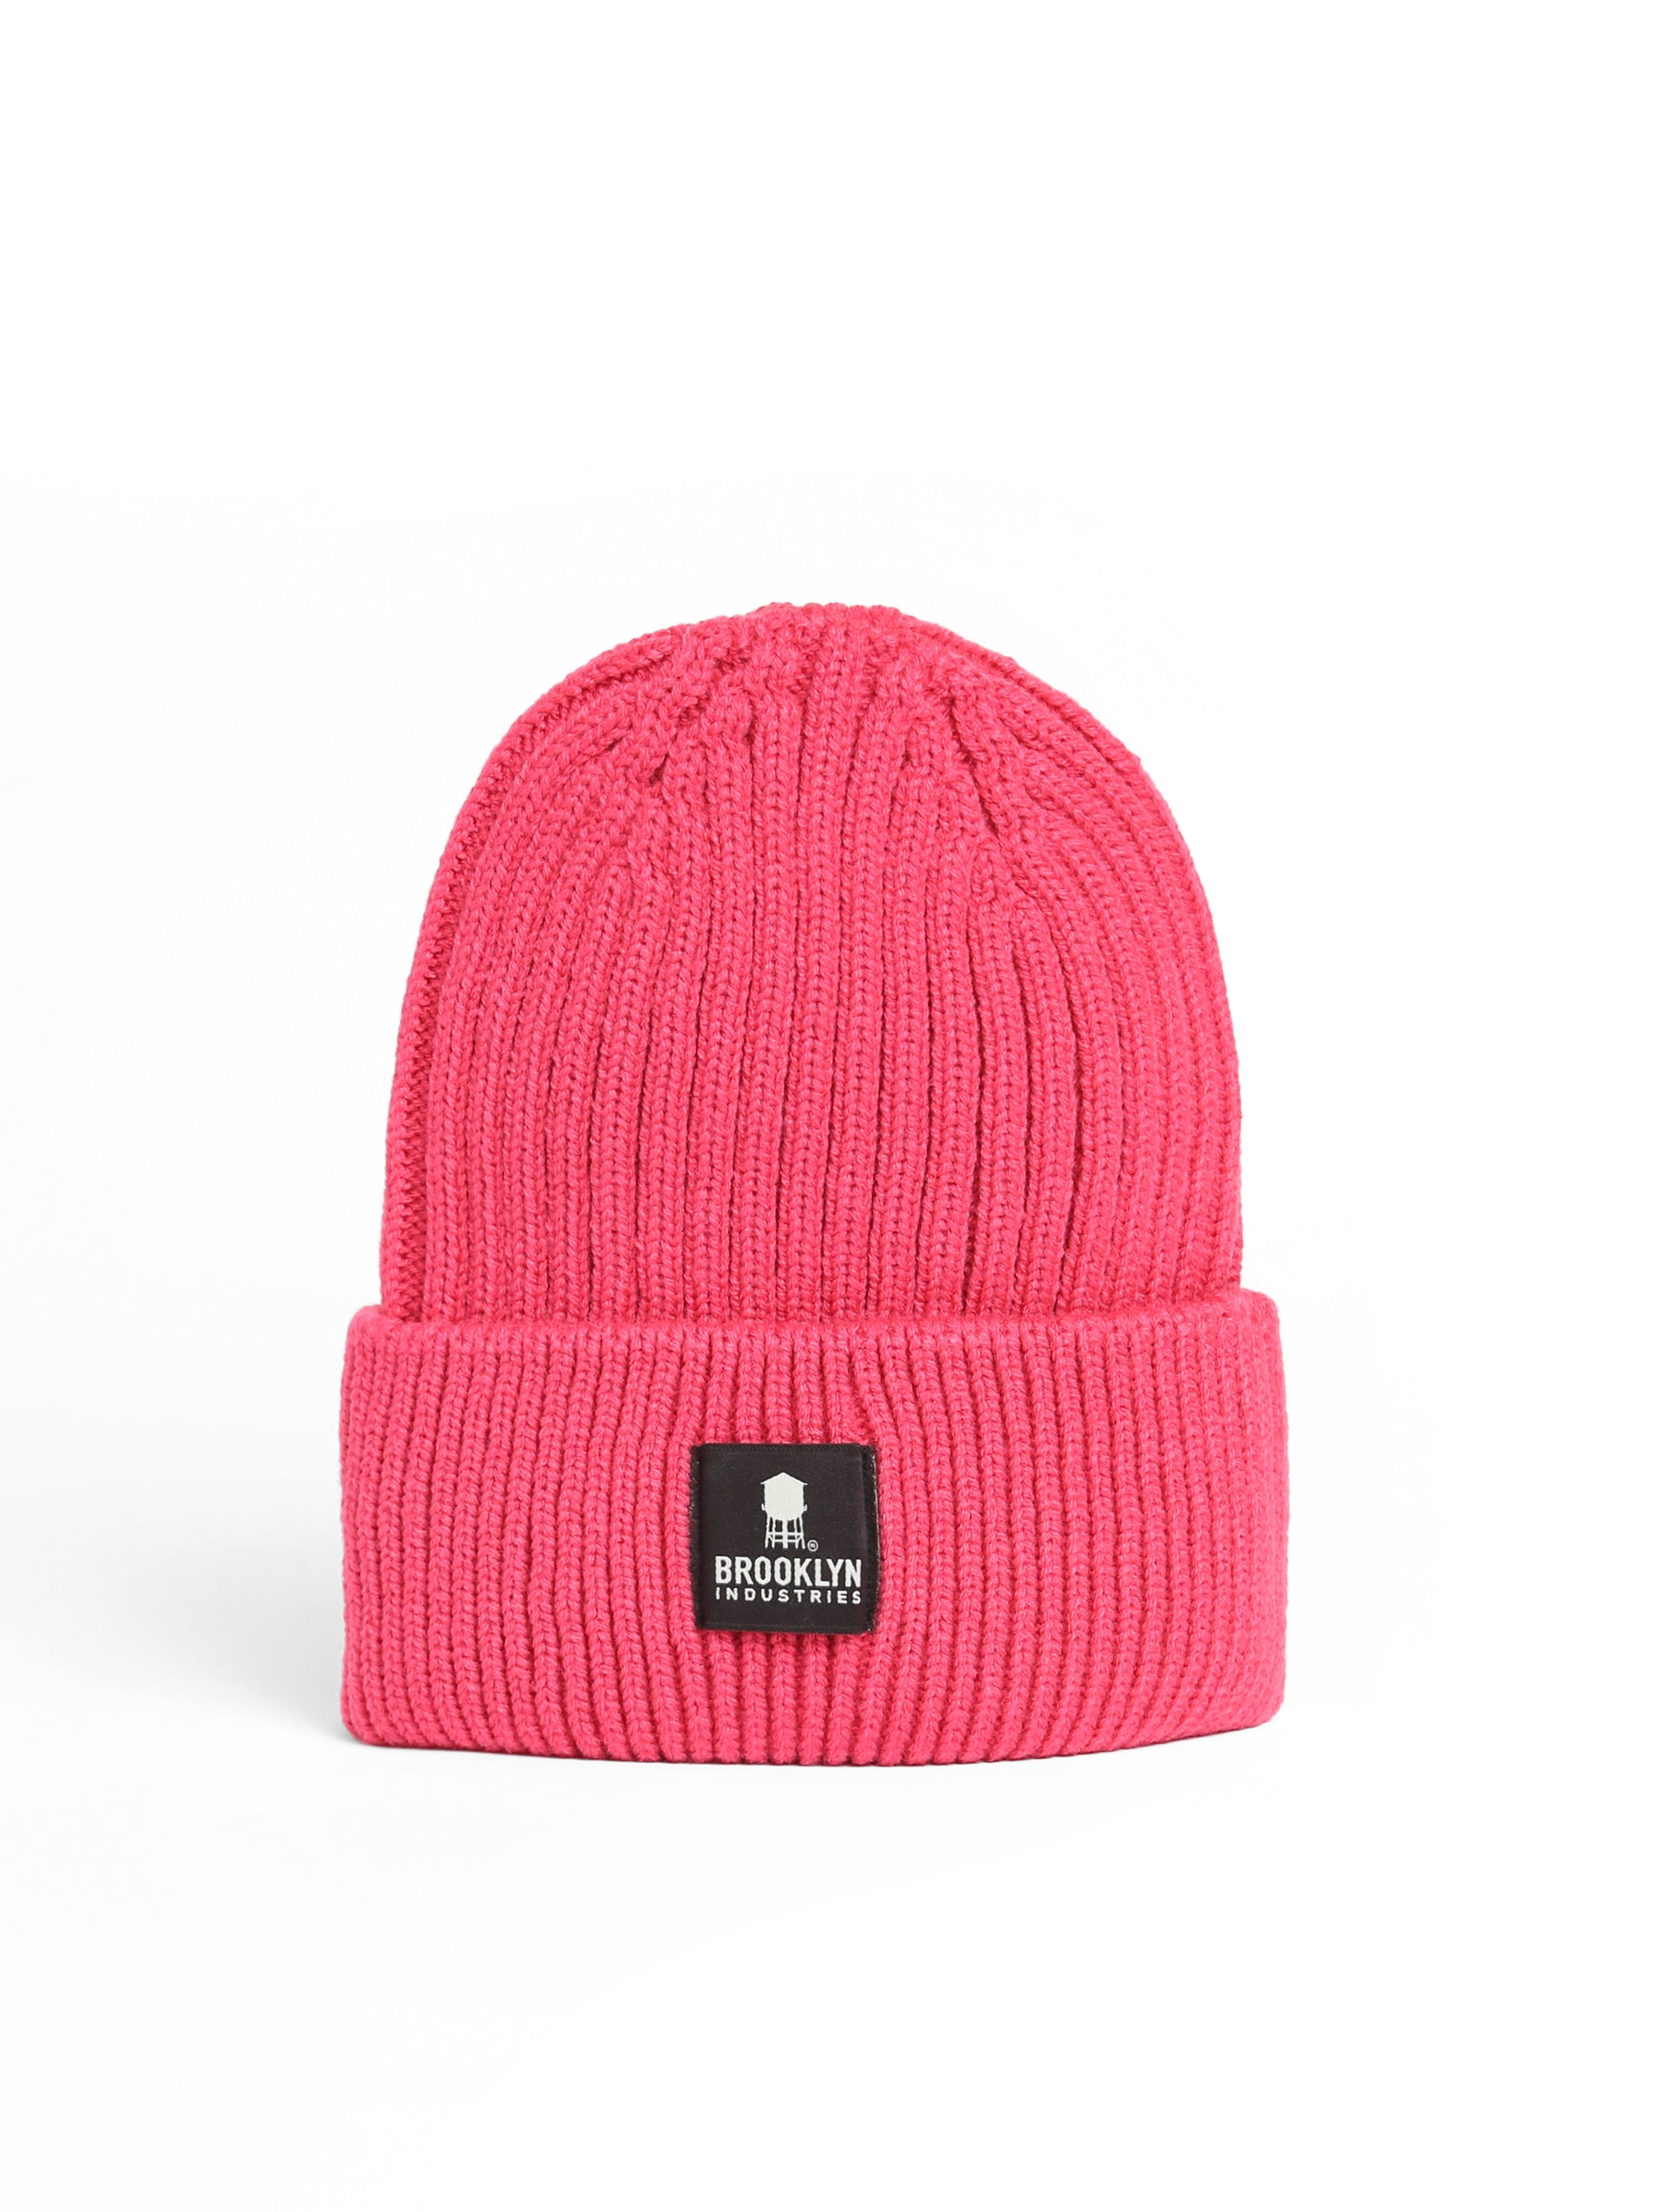 Ribbed Beanie Hat in Pink - BROOKLYN INDUSTRIES